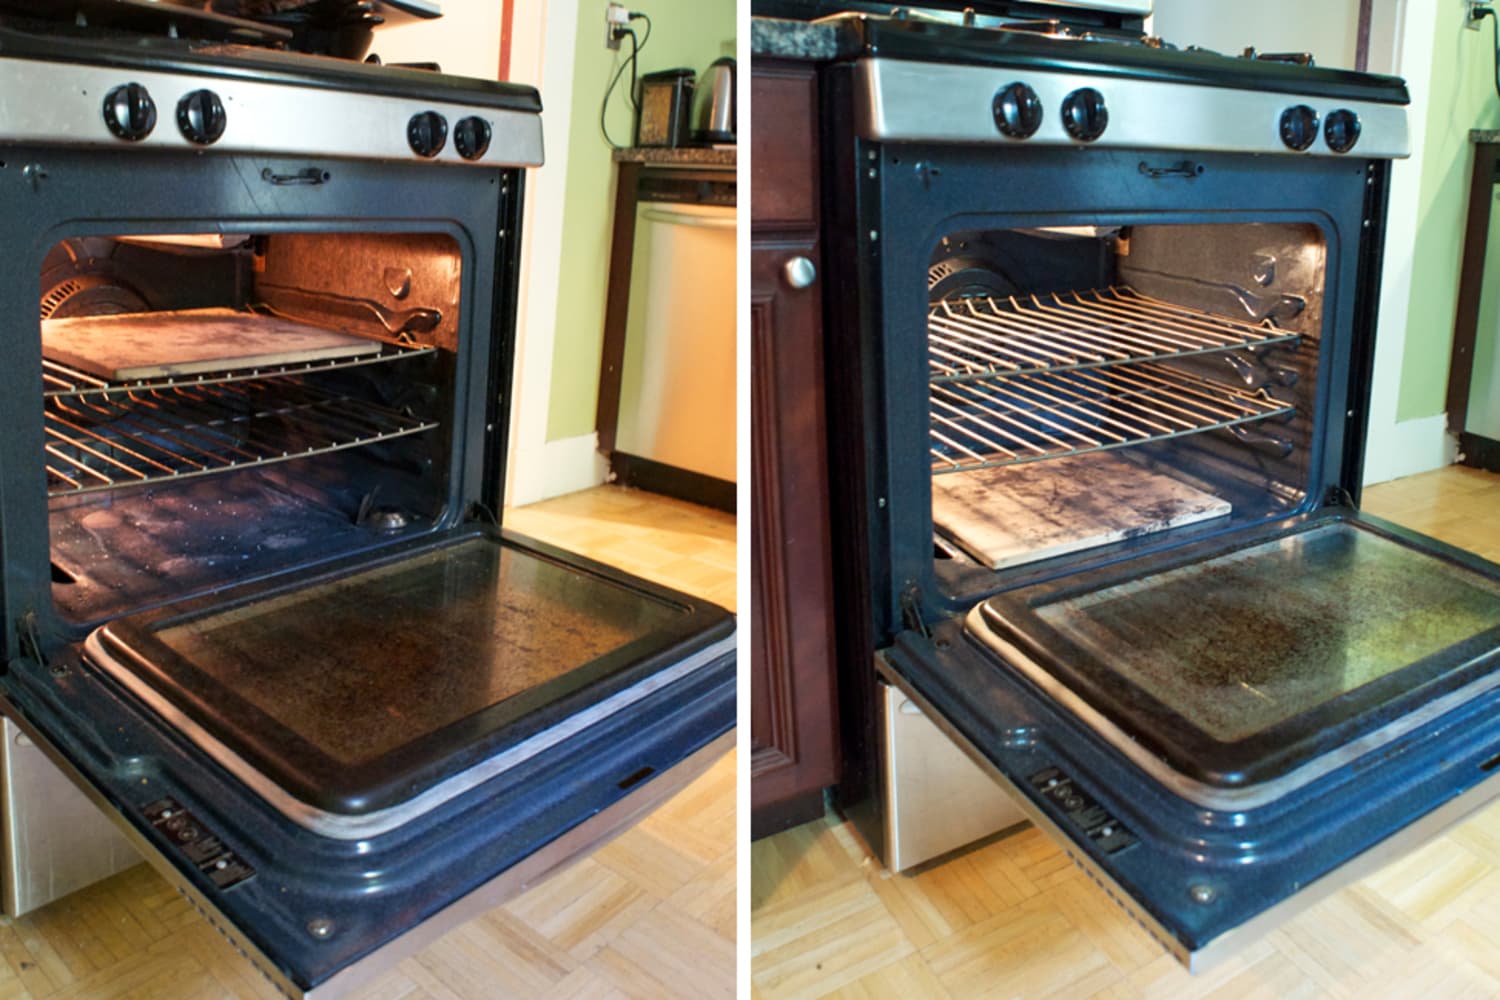 How To Deep Clean An Oven 